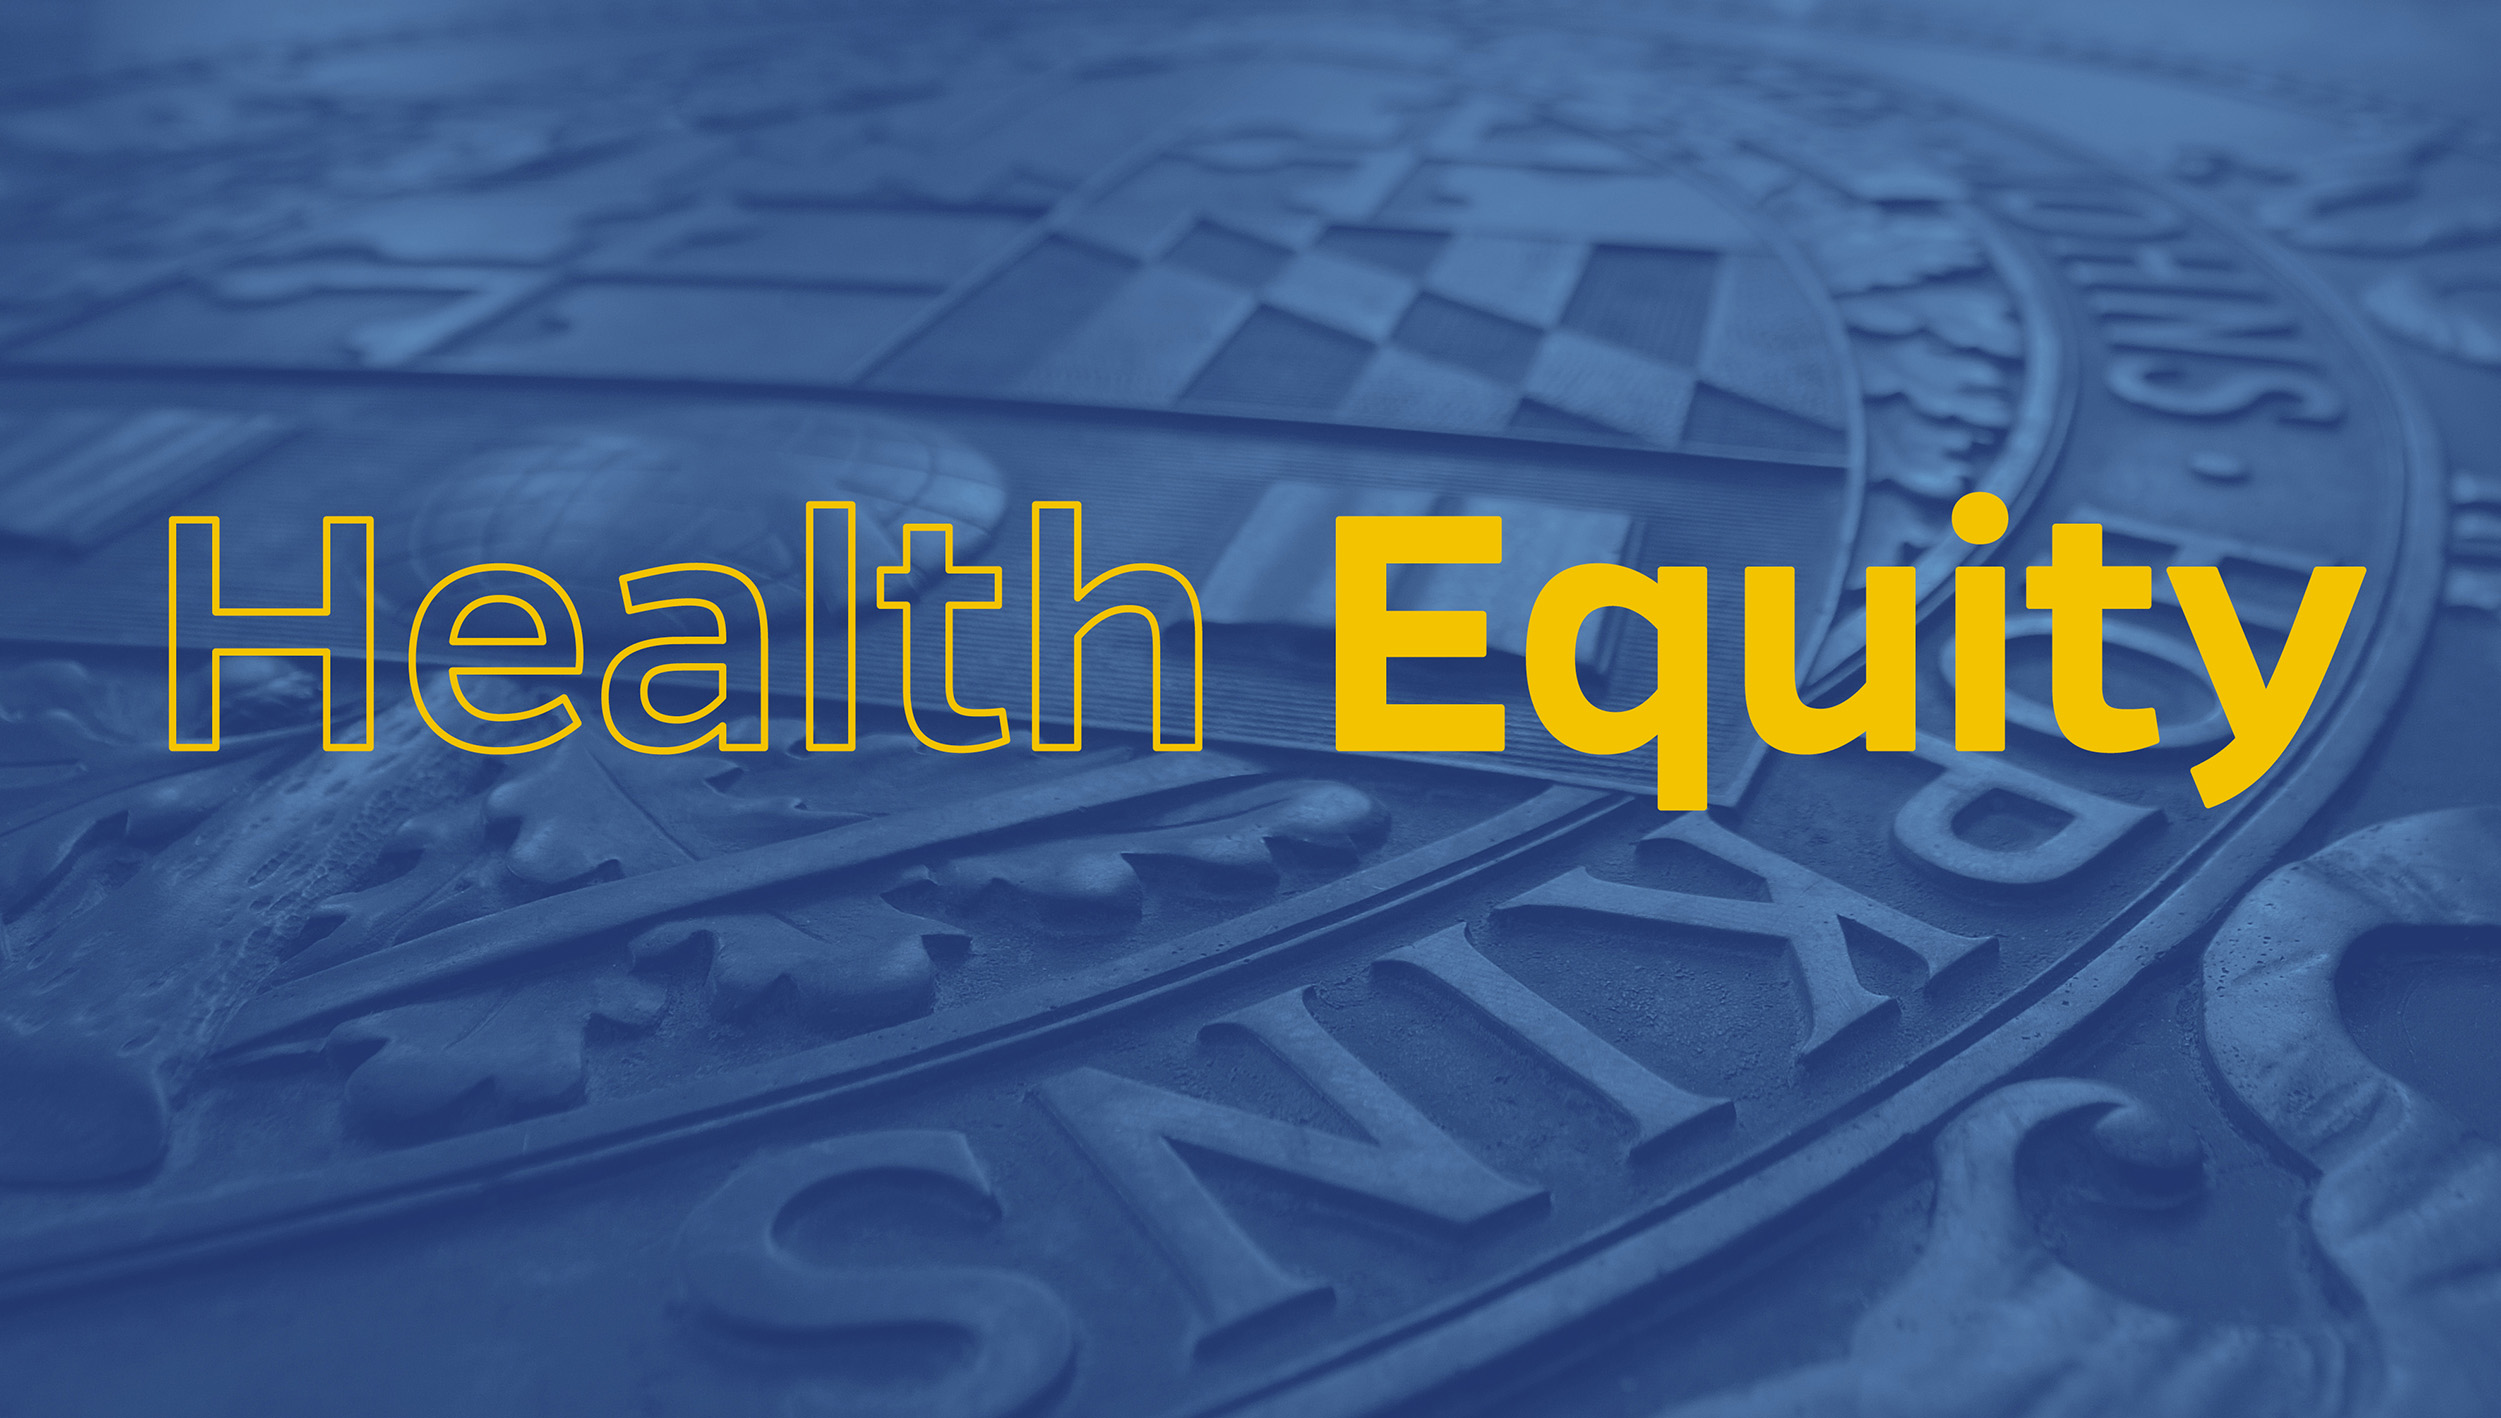 February Hopkins Health Equity Discussion